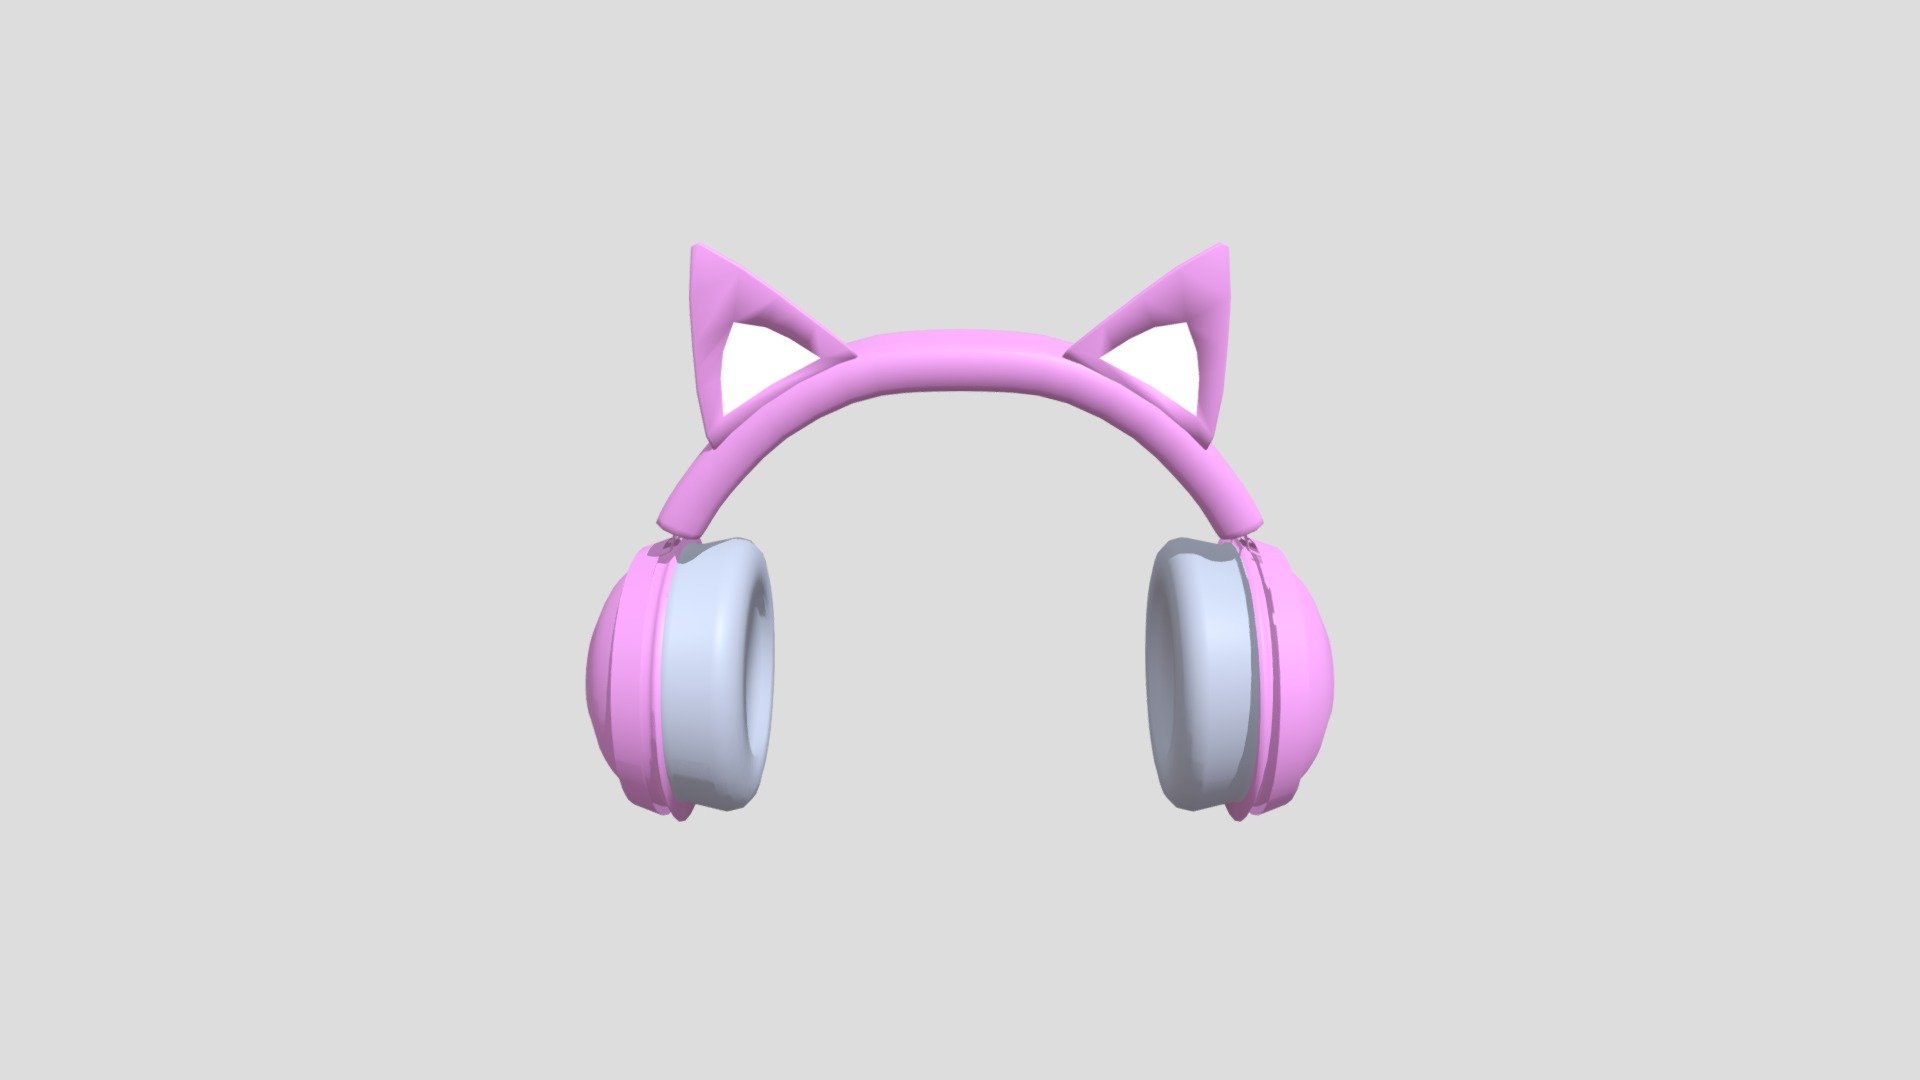 Kitty Ear Headset as worn on a head.  Modeled based off the Razer Kraken Kitty headset and altered to look as though it's being worn on an avatar head 3d model